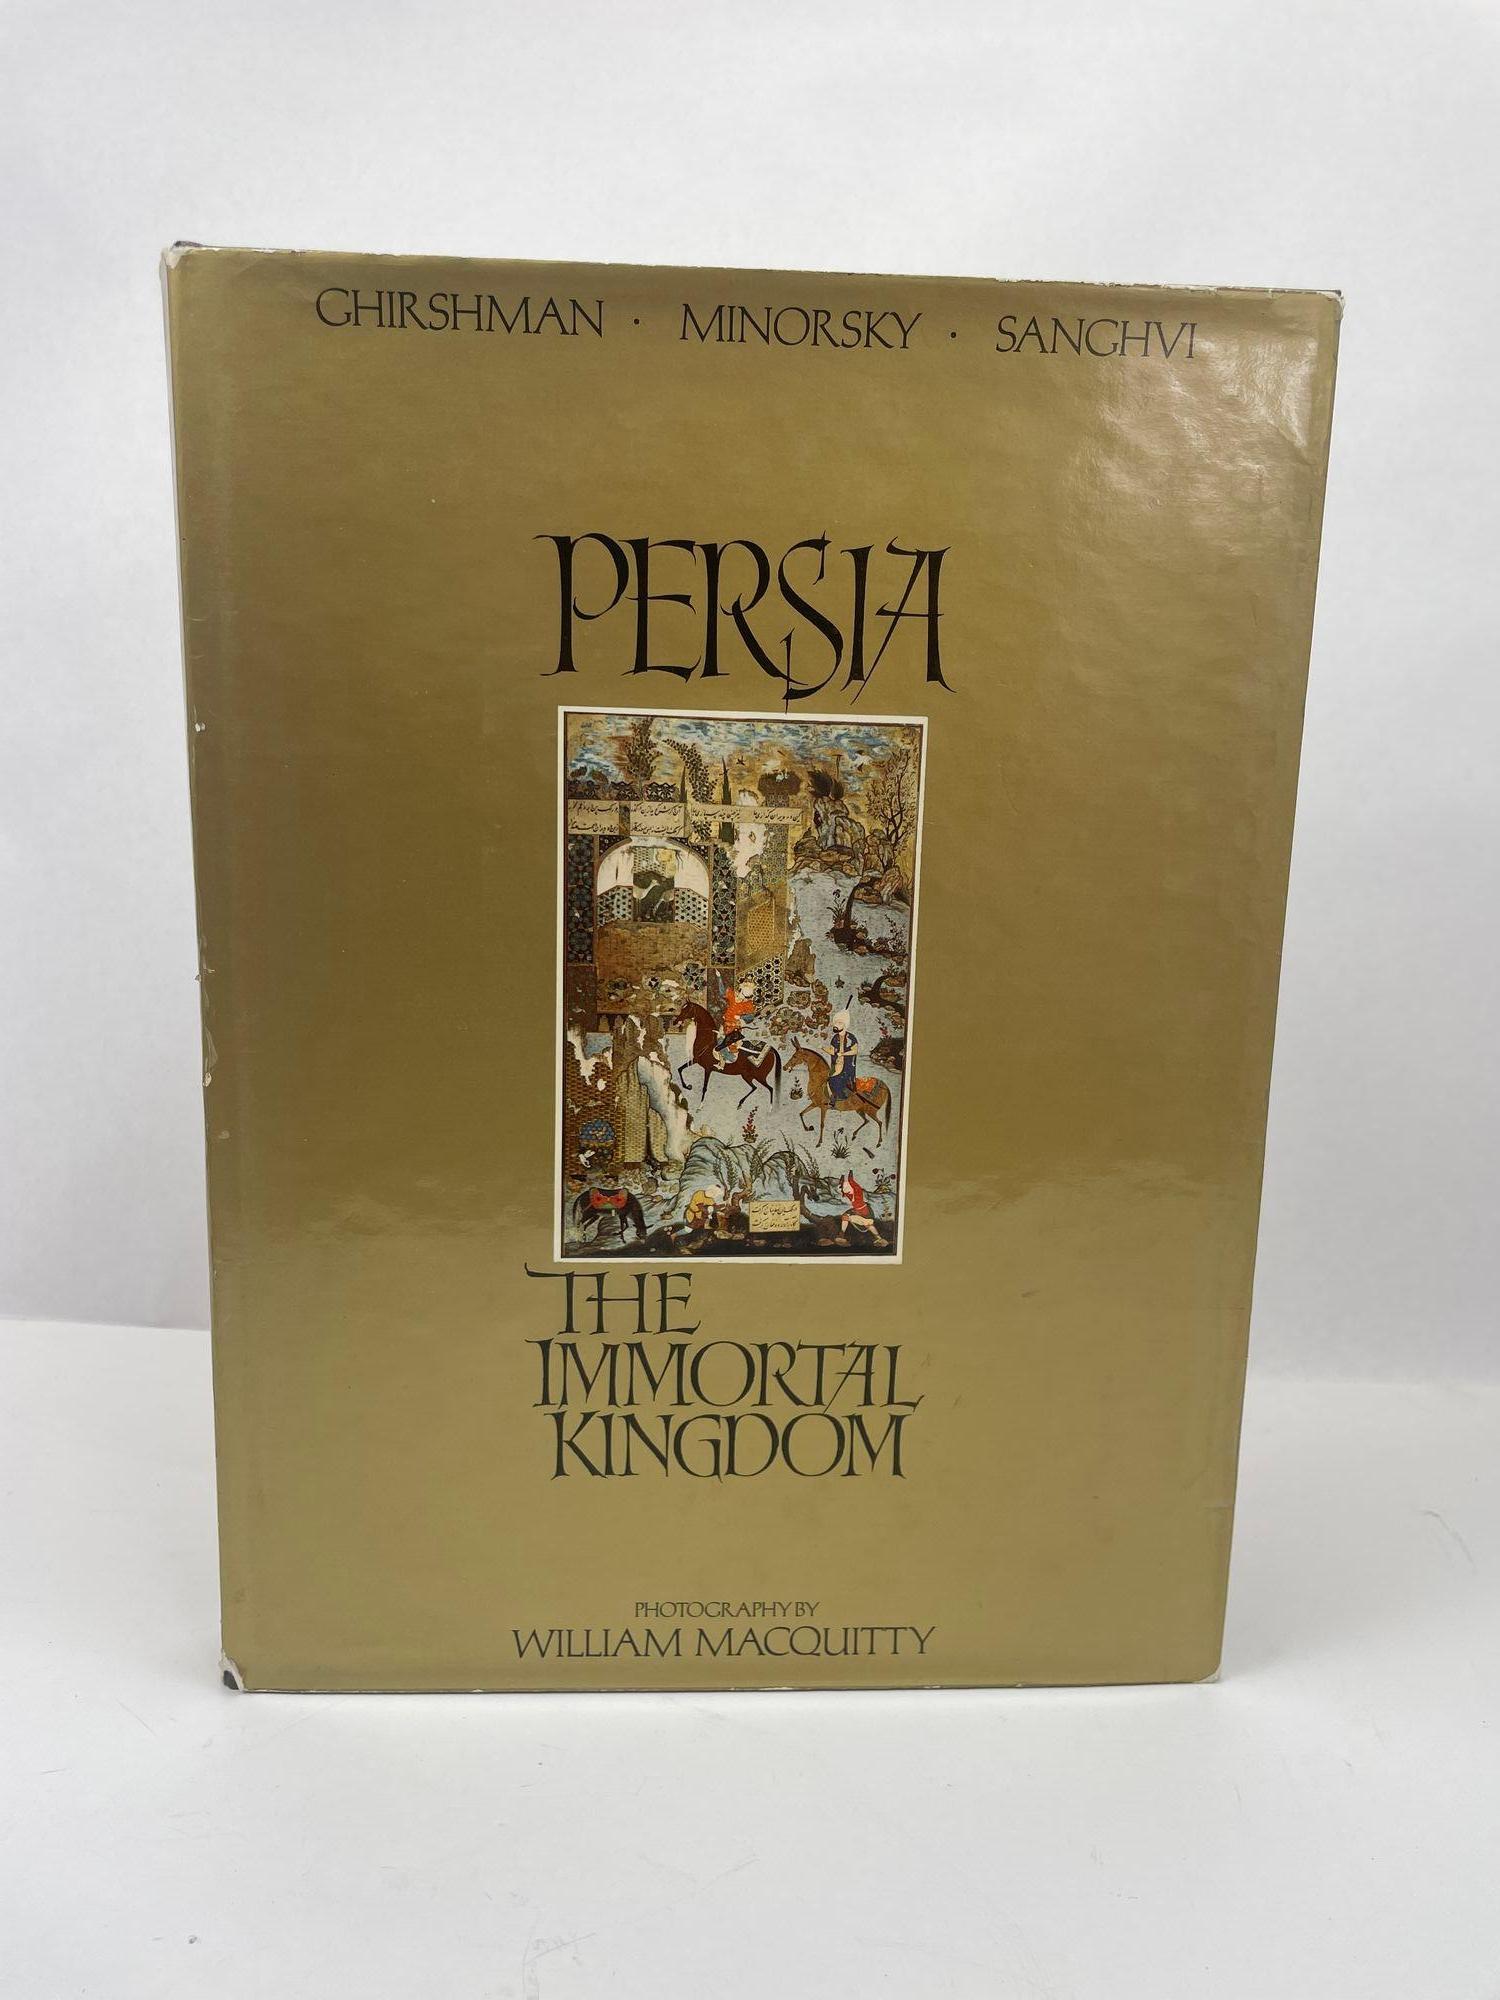 Persia The Immortal Kingdom by Ghirshman Minorsky Sanghvi 1971 For Sale 1